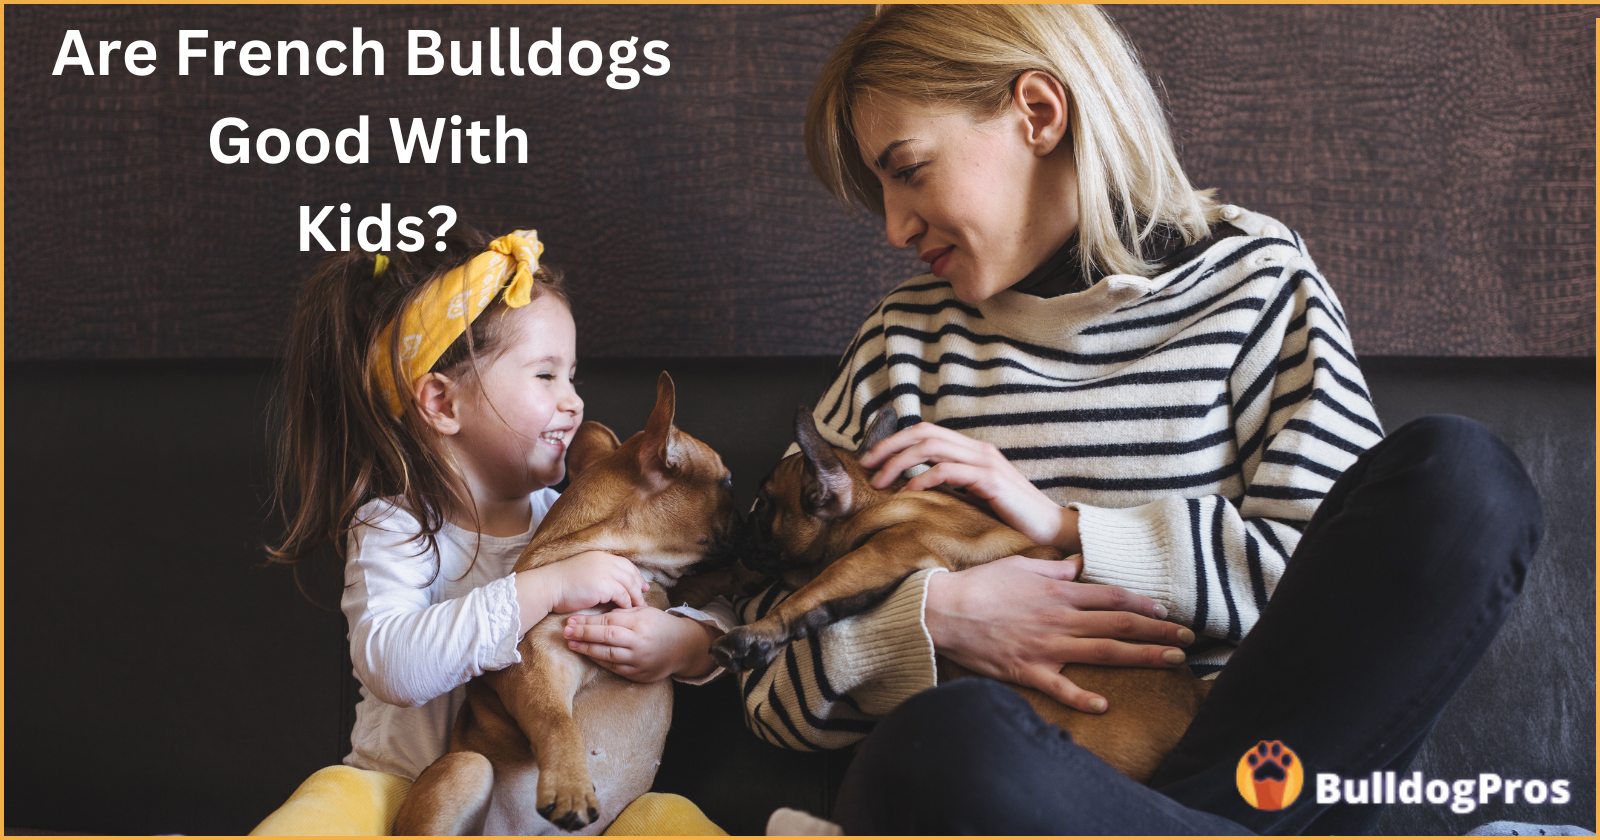 Are French Bulldogs Good With Kids